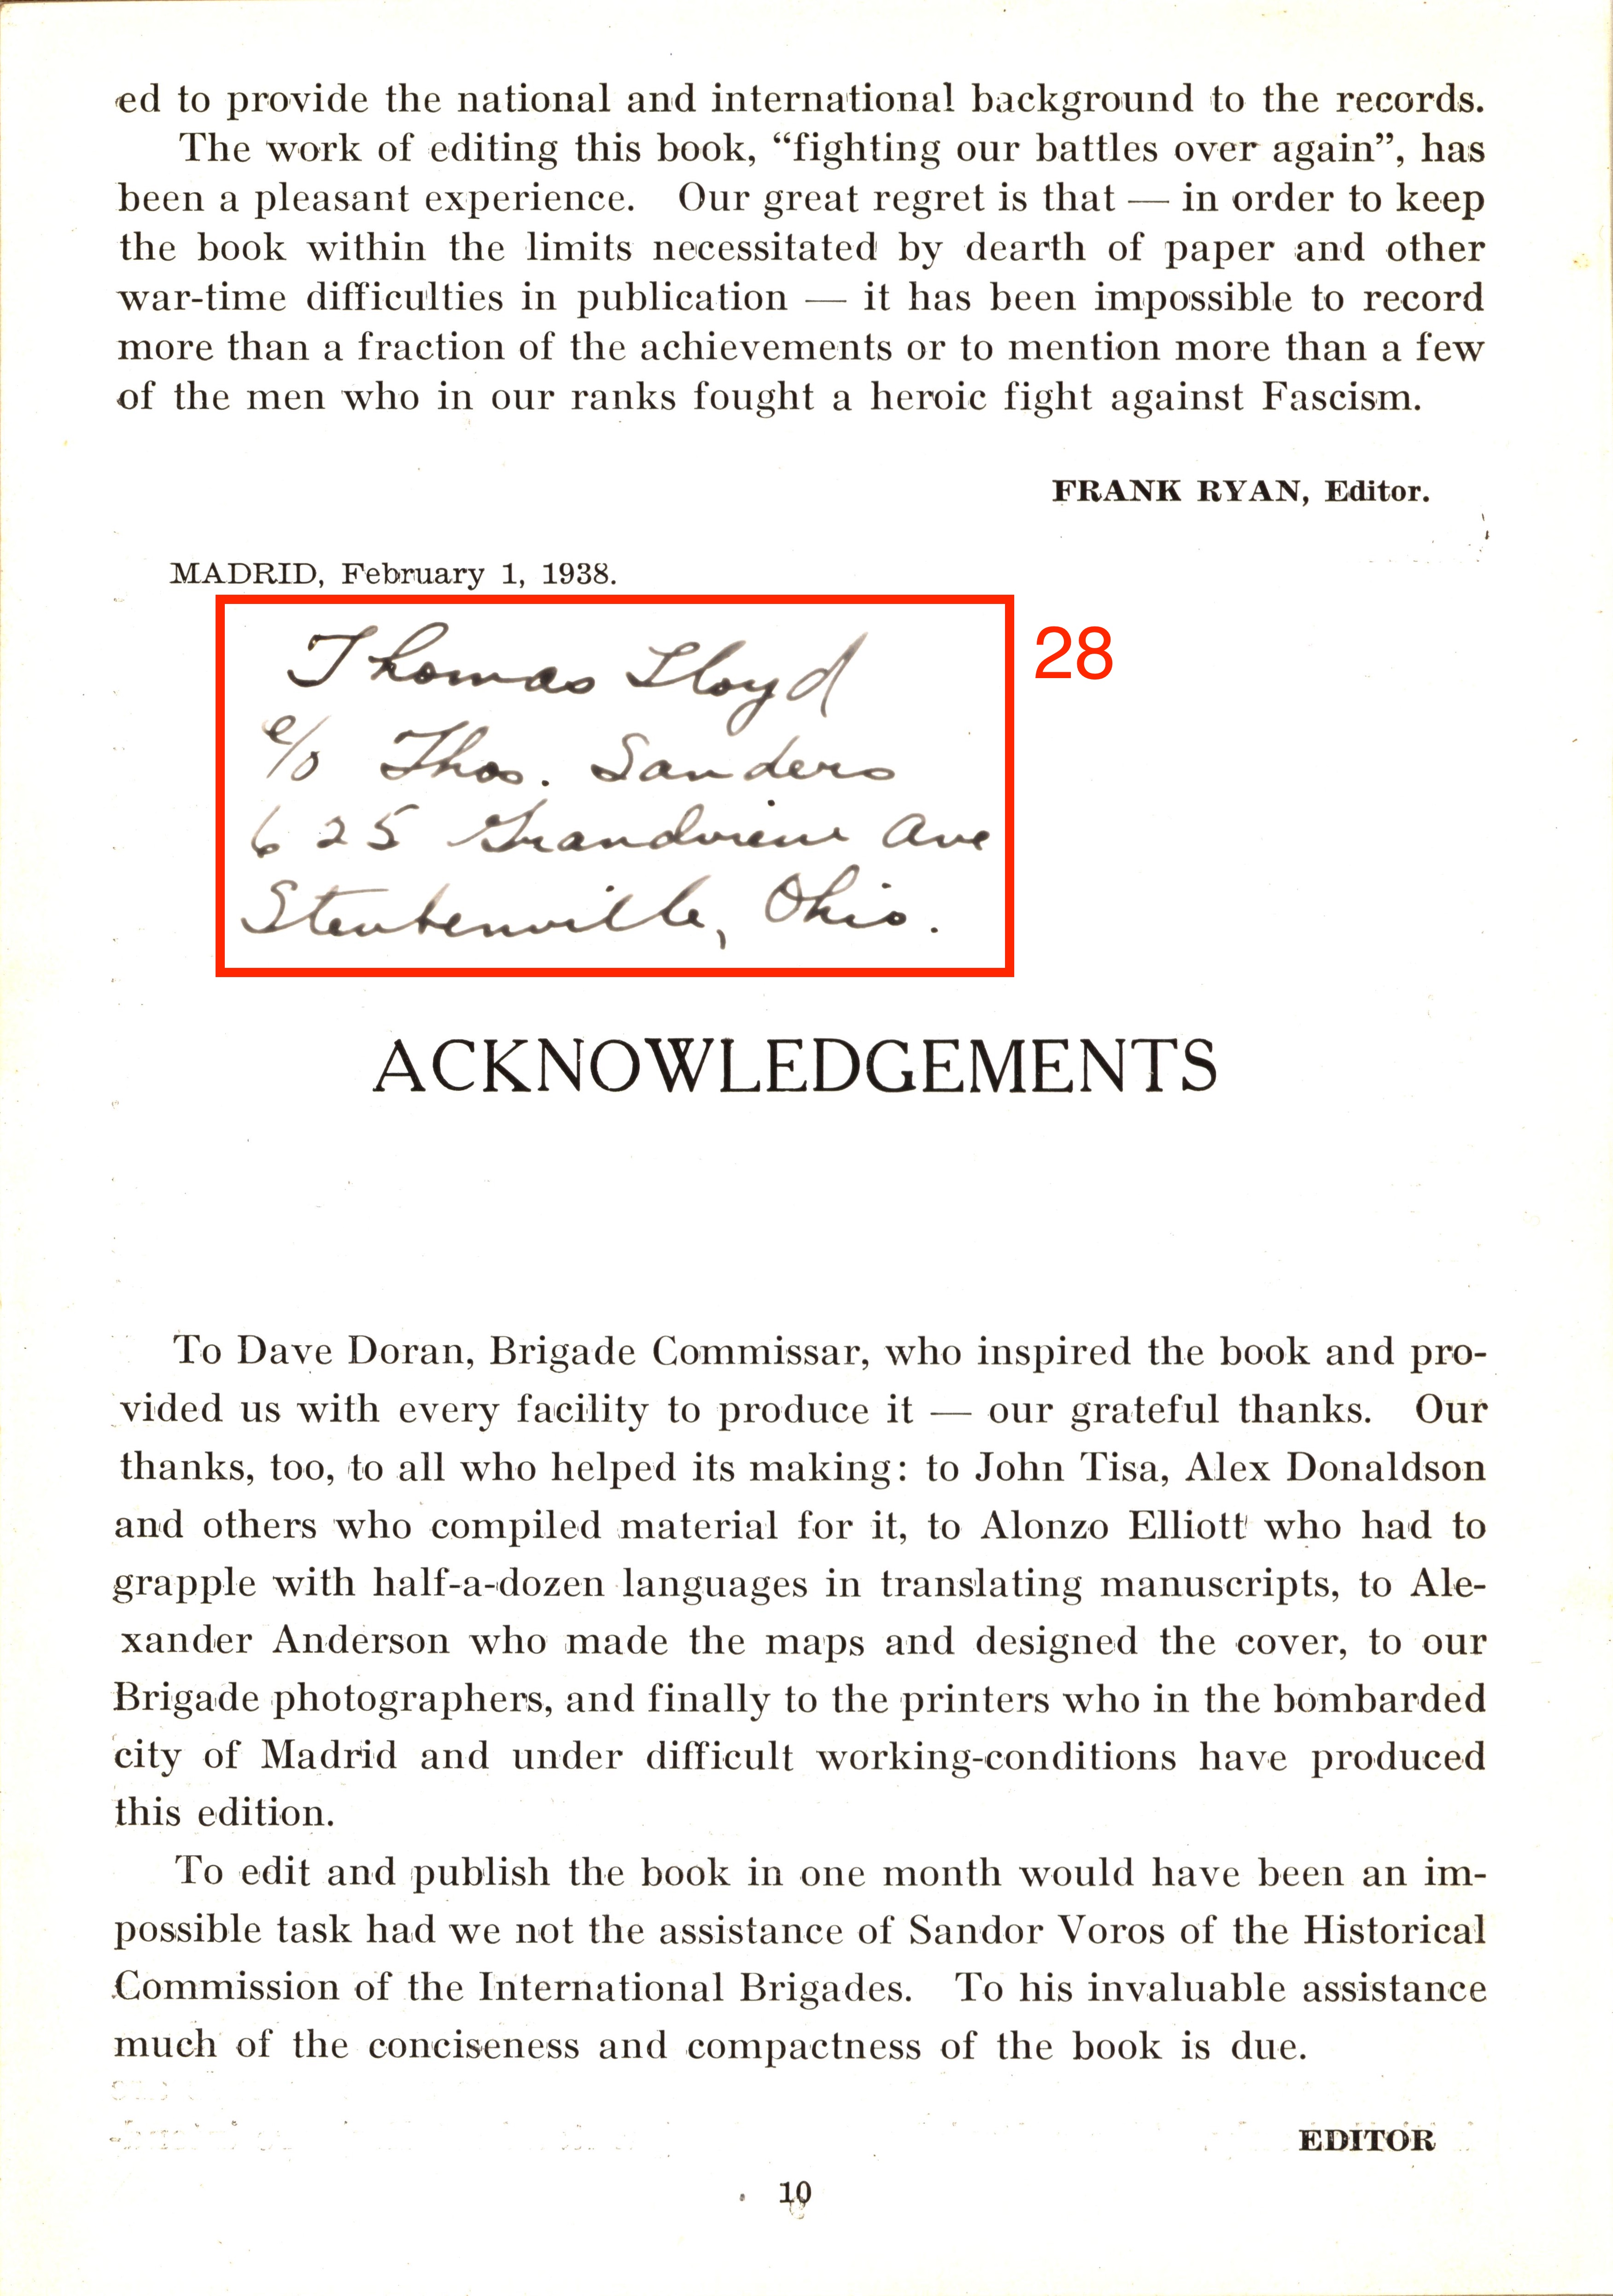 Acknowledgements page of the Book of the XV Brigade, with signatures circled